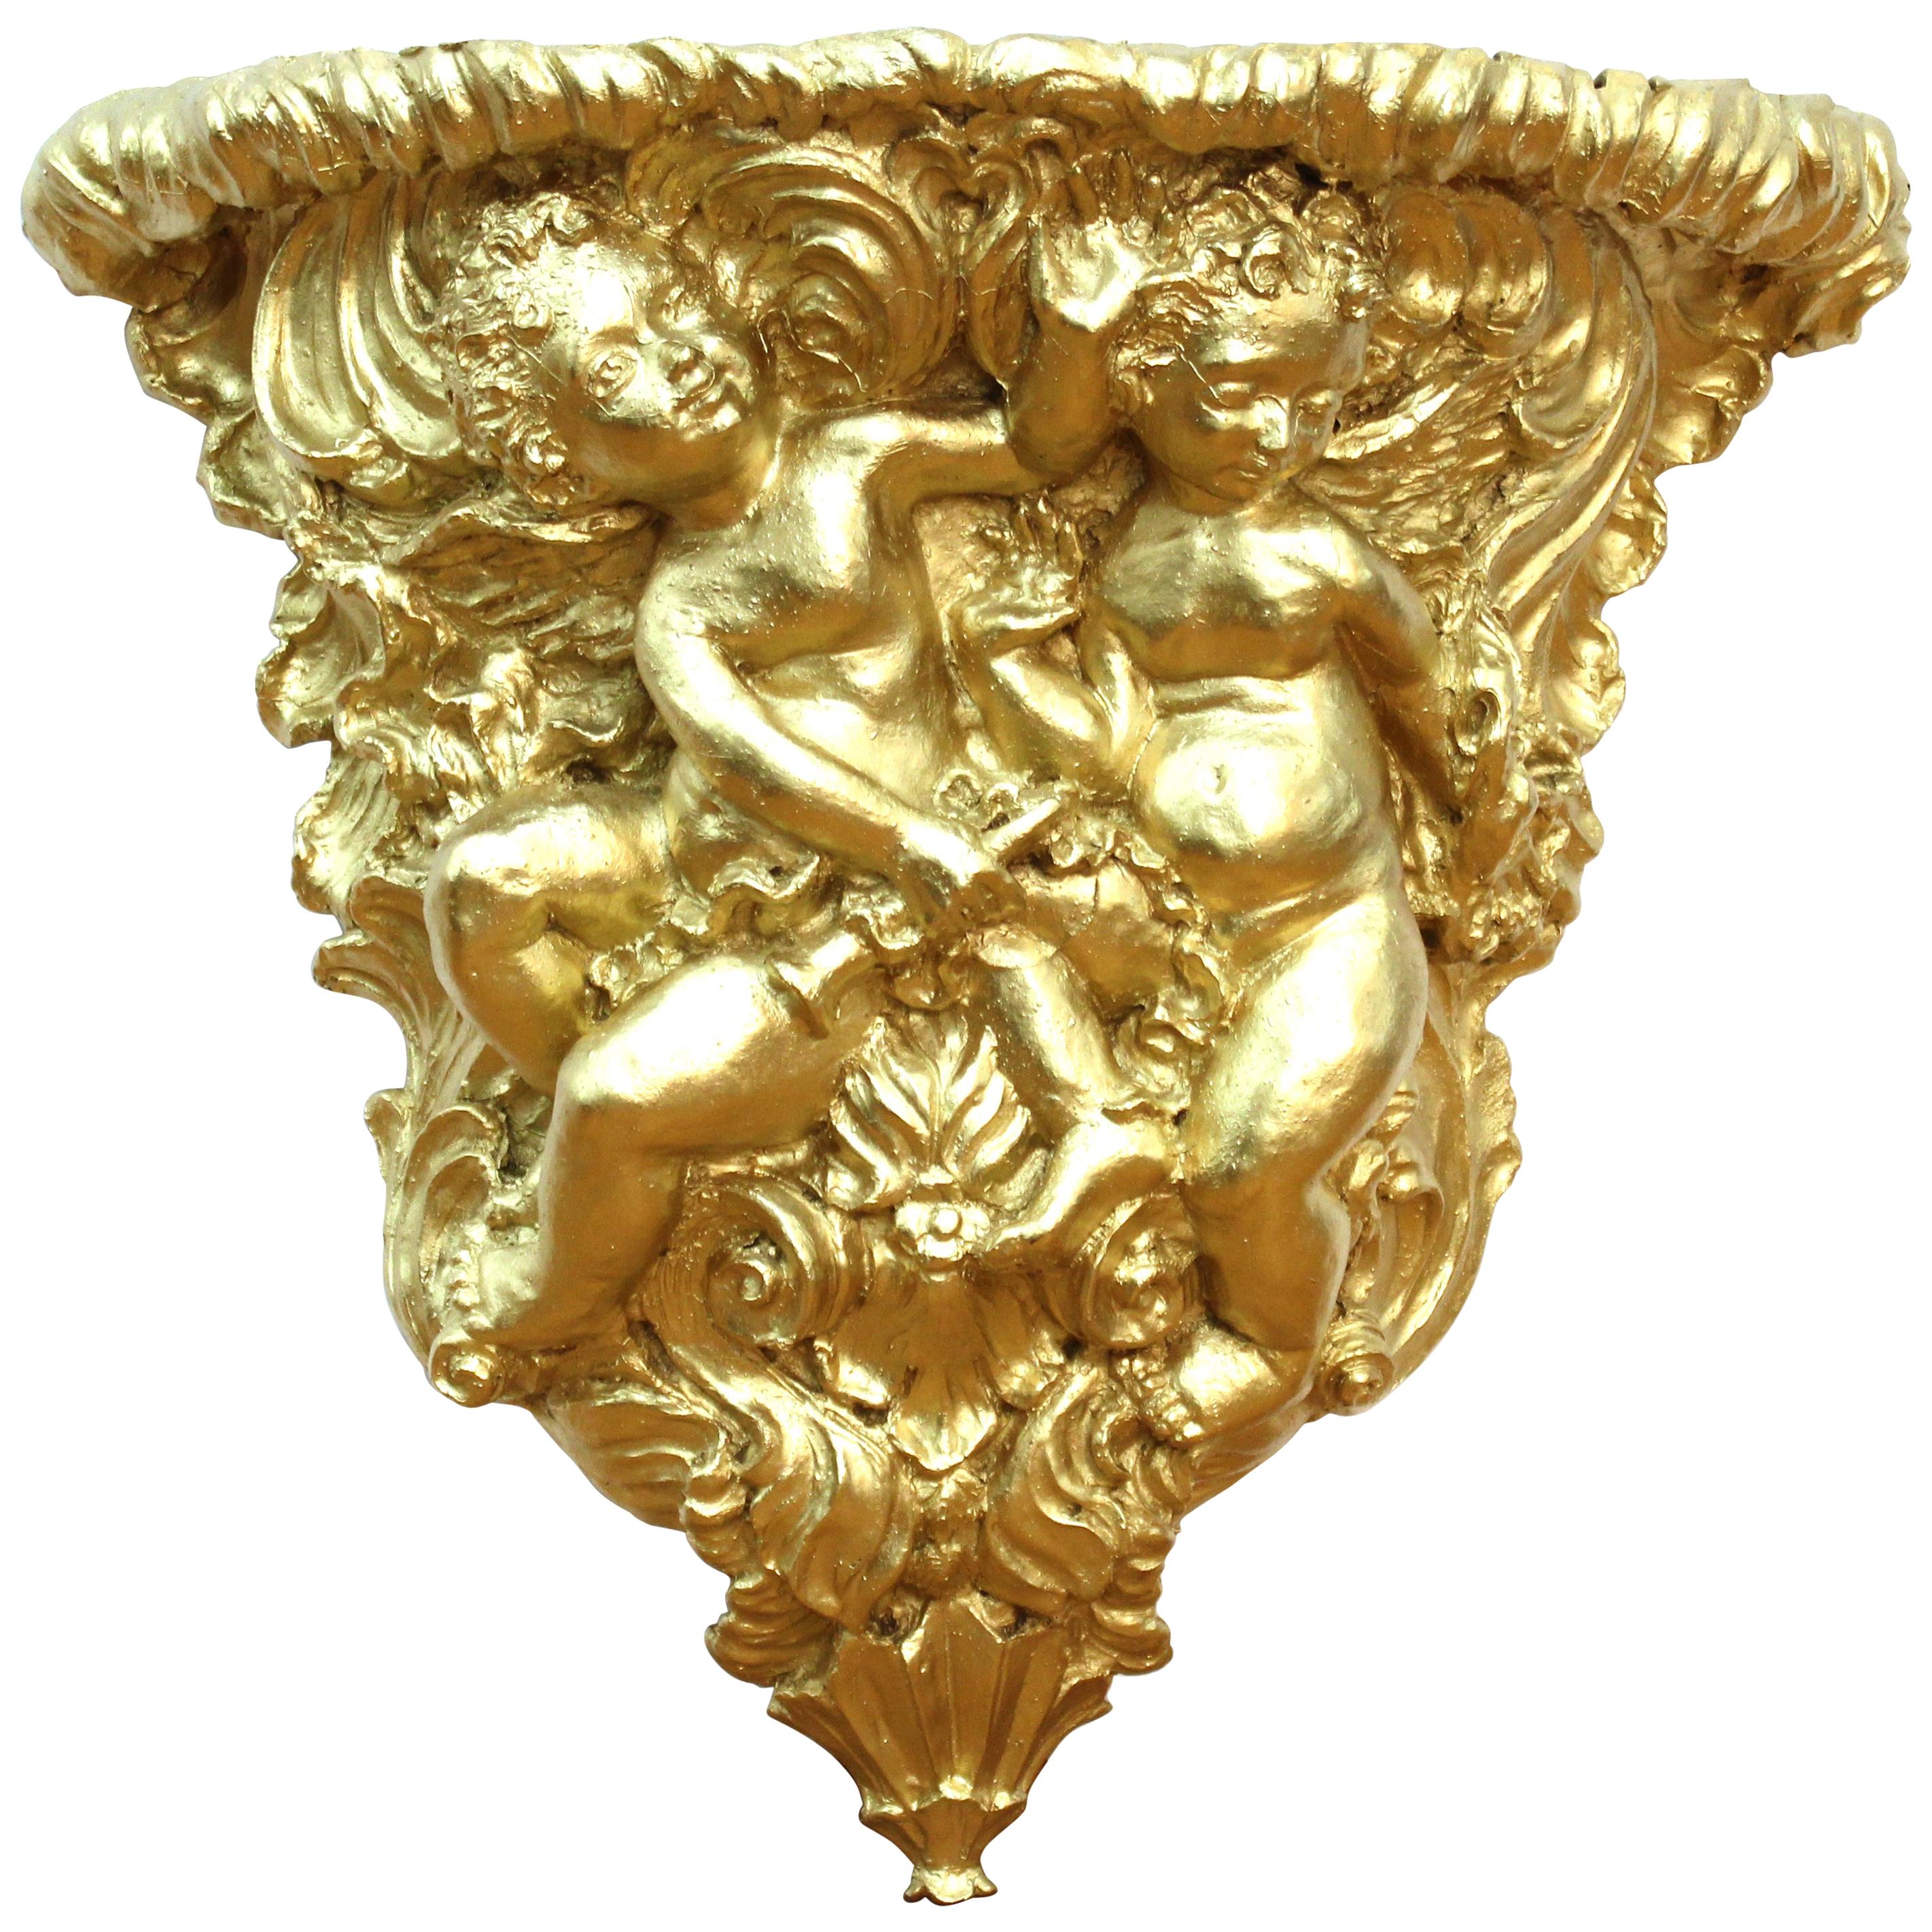 Baroque Revival Style Gilt Wall Bracket with Putti